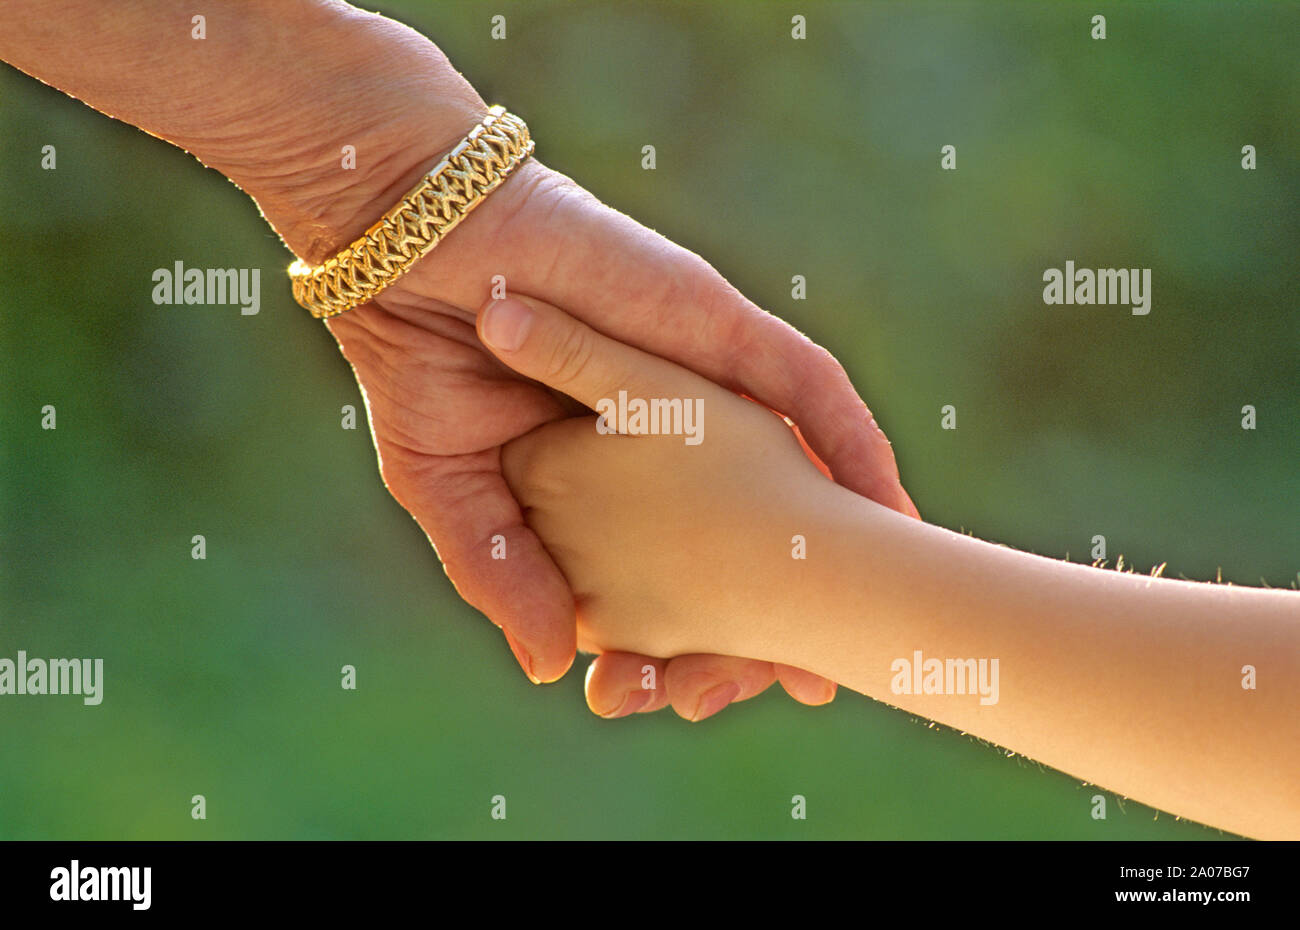 Grandmother holding hands with her granddaughter outdoors close up Stock Photo